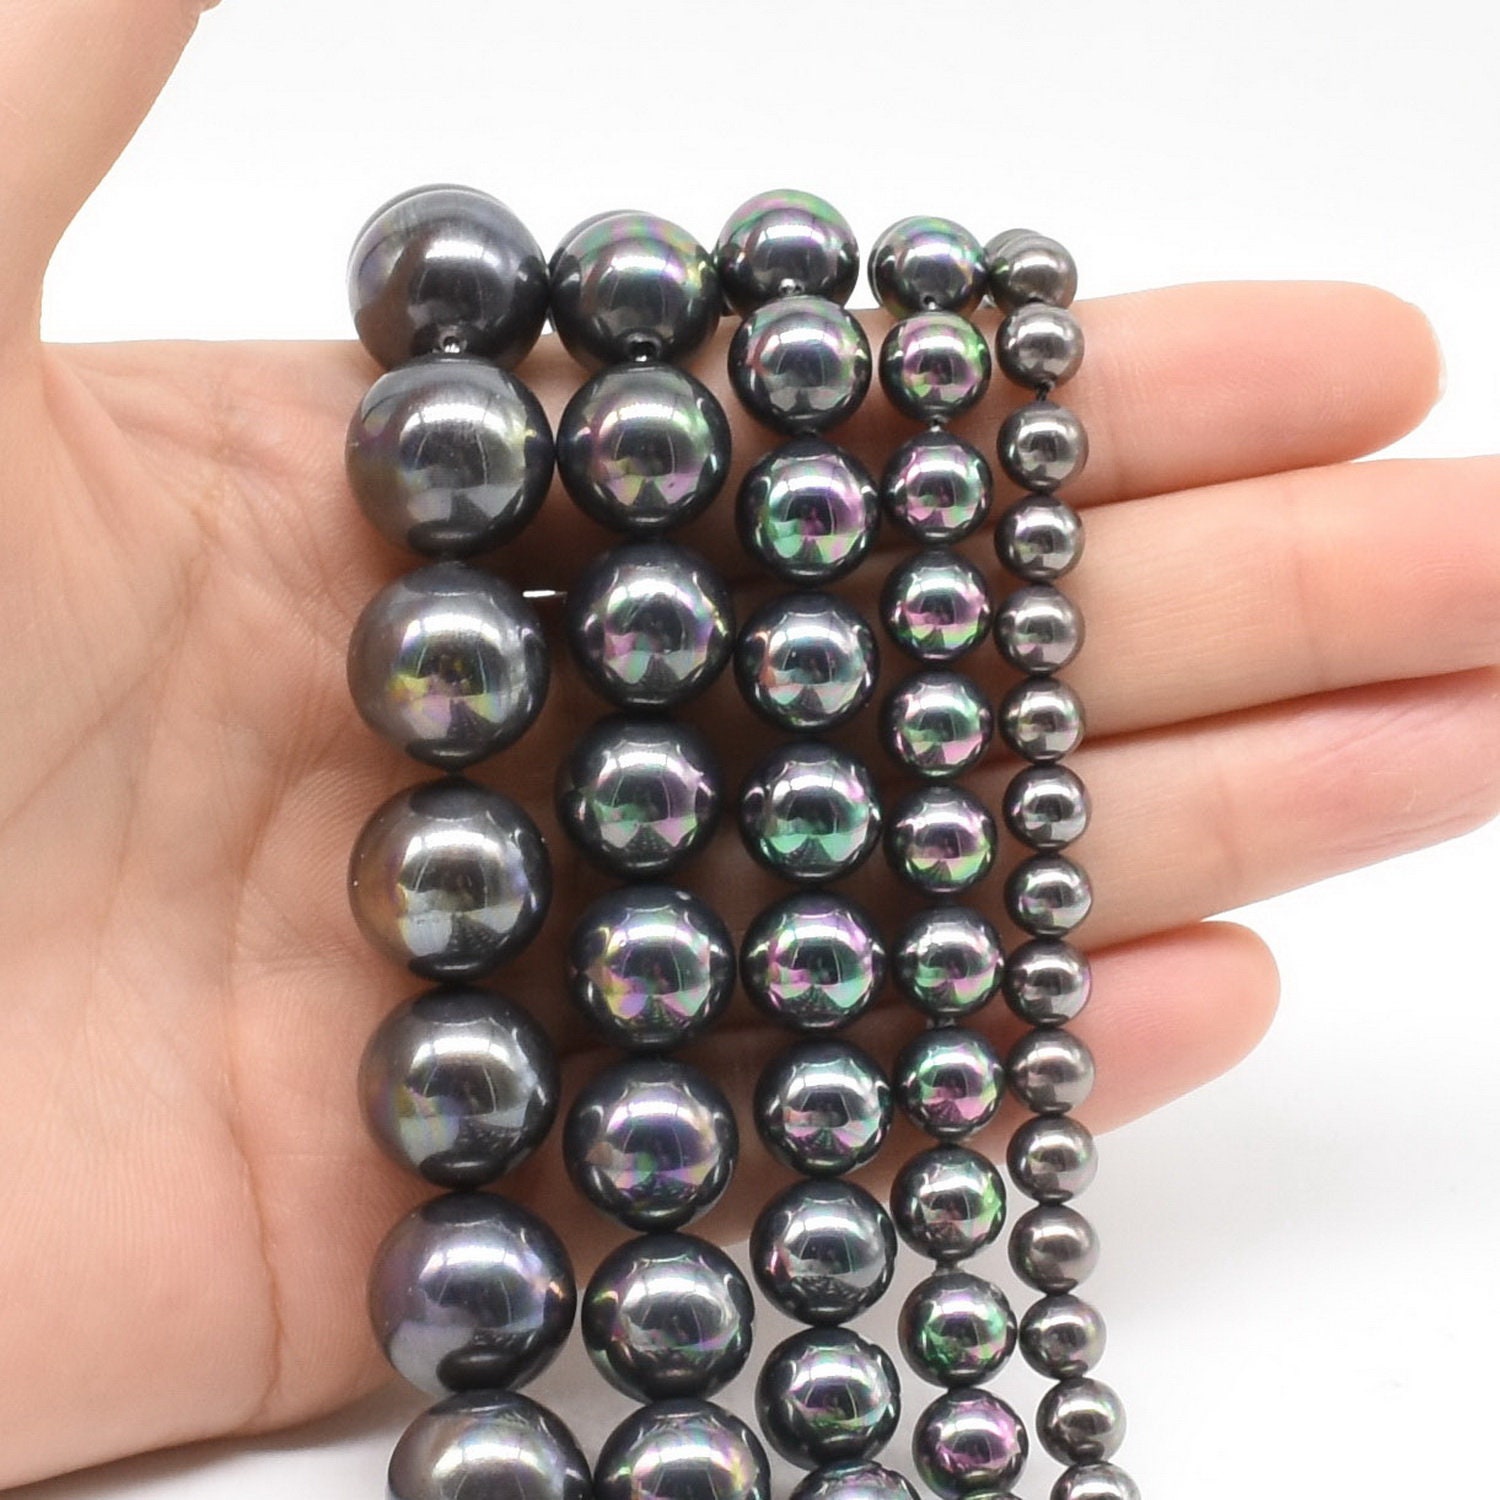 10mm Solid and Pearl inspired Colored Beads, 1 pack of 50 beads